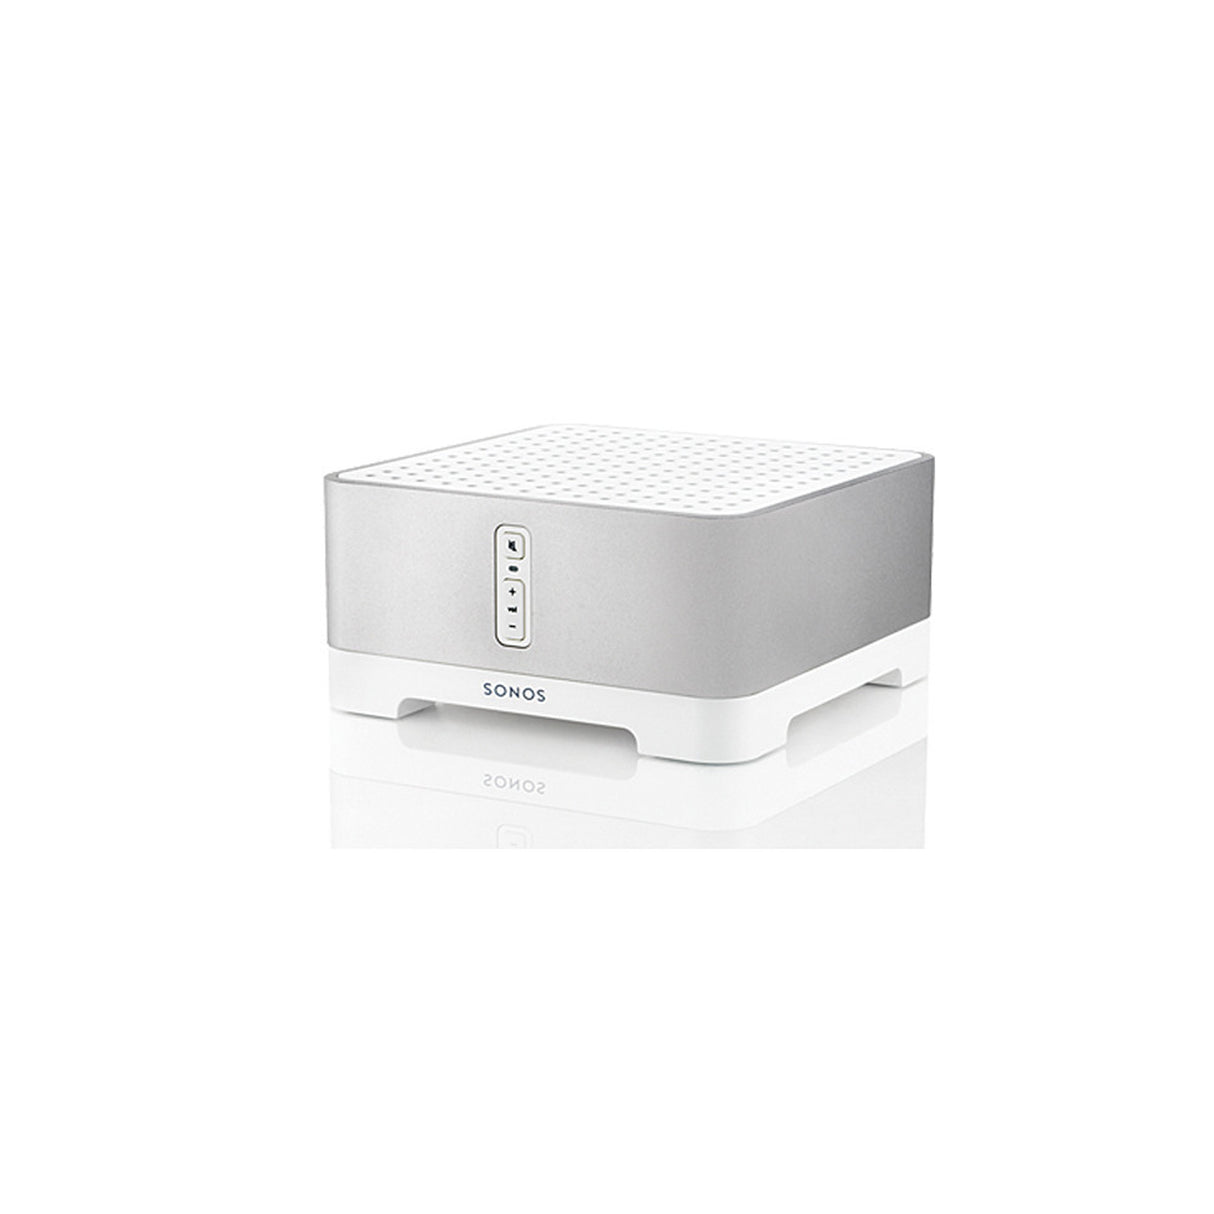 Sonos Connect Amp Gen 1 - Digital Music Streamer/ Stereo Amplifier (Like New Open Box Unit/Without Box Unit)